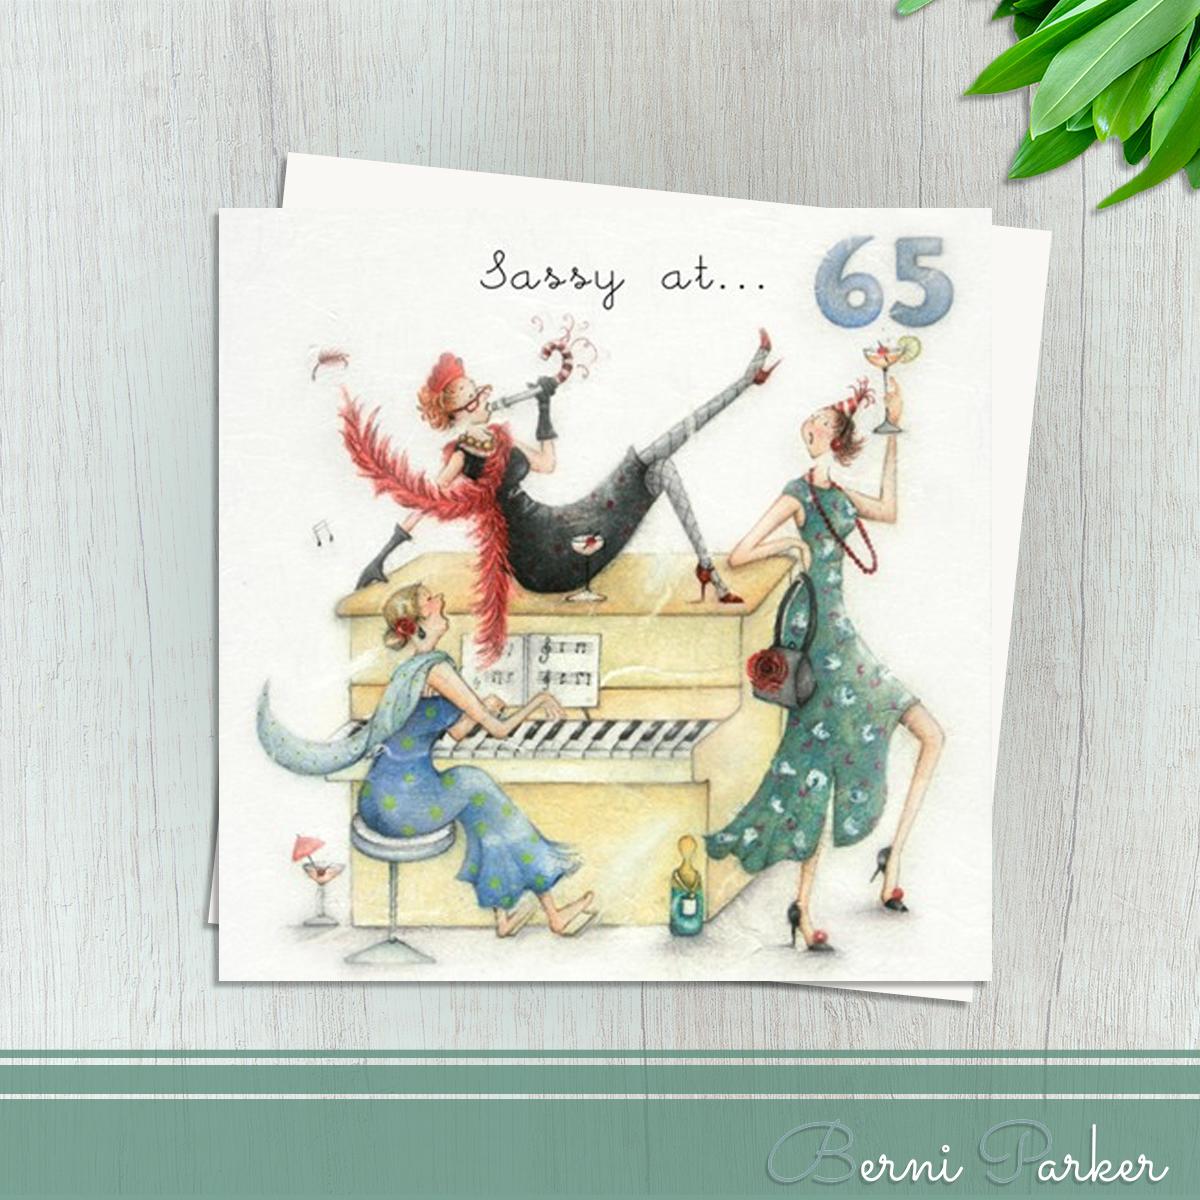 Three Ladies Around The Piano-One Playing, One Singing And One Laying On The Top! Caption Of Sassy At 65. Blank inside For Your Own Message. Complete With White Envelope